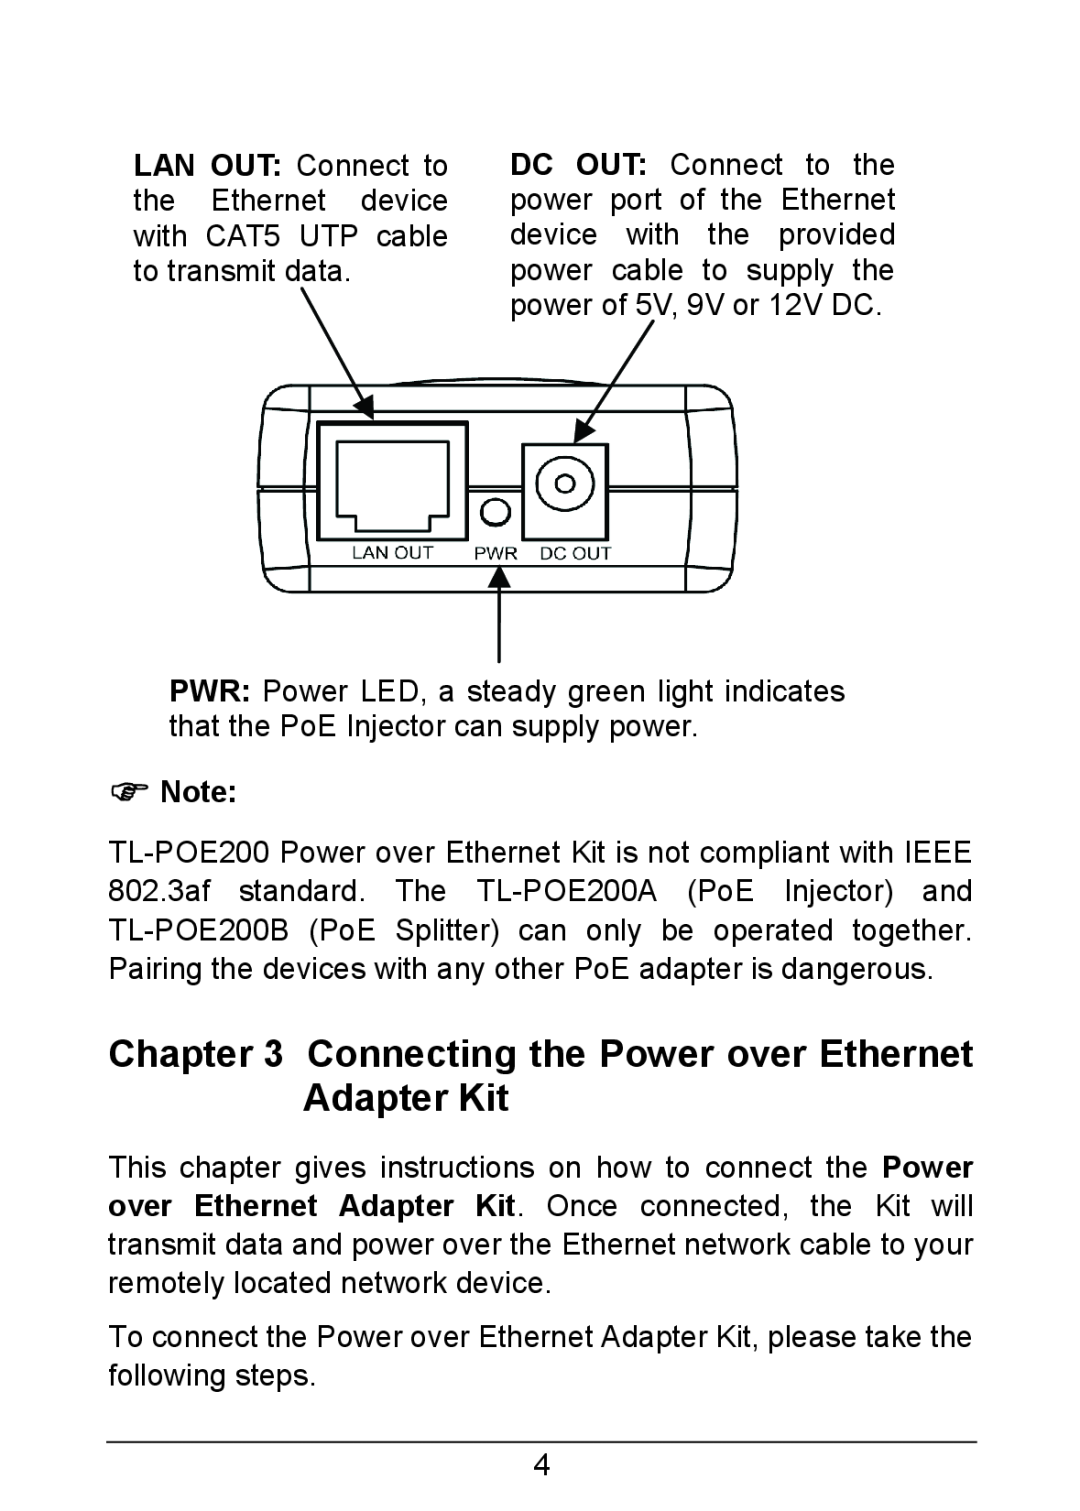 TP-Link TL-POE200 manual Connecting the Power over Ethernet Adapter Kit 